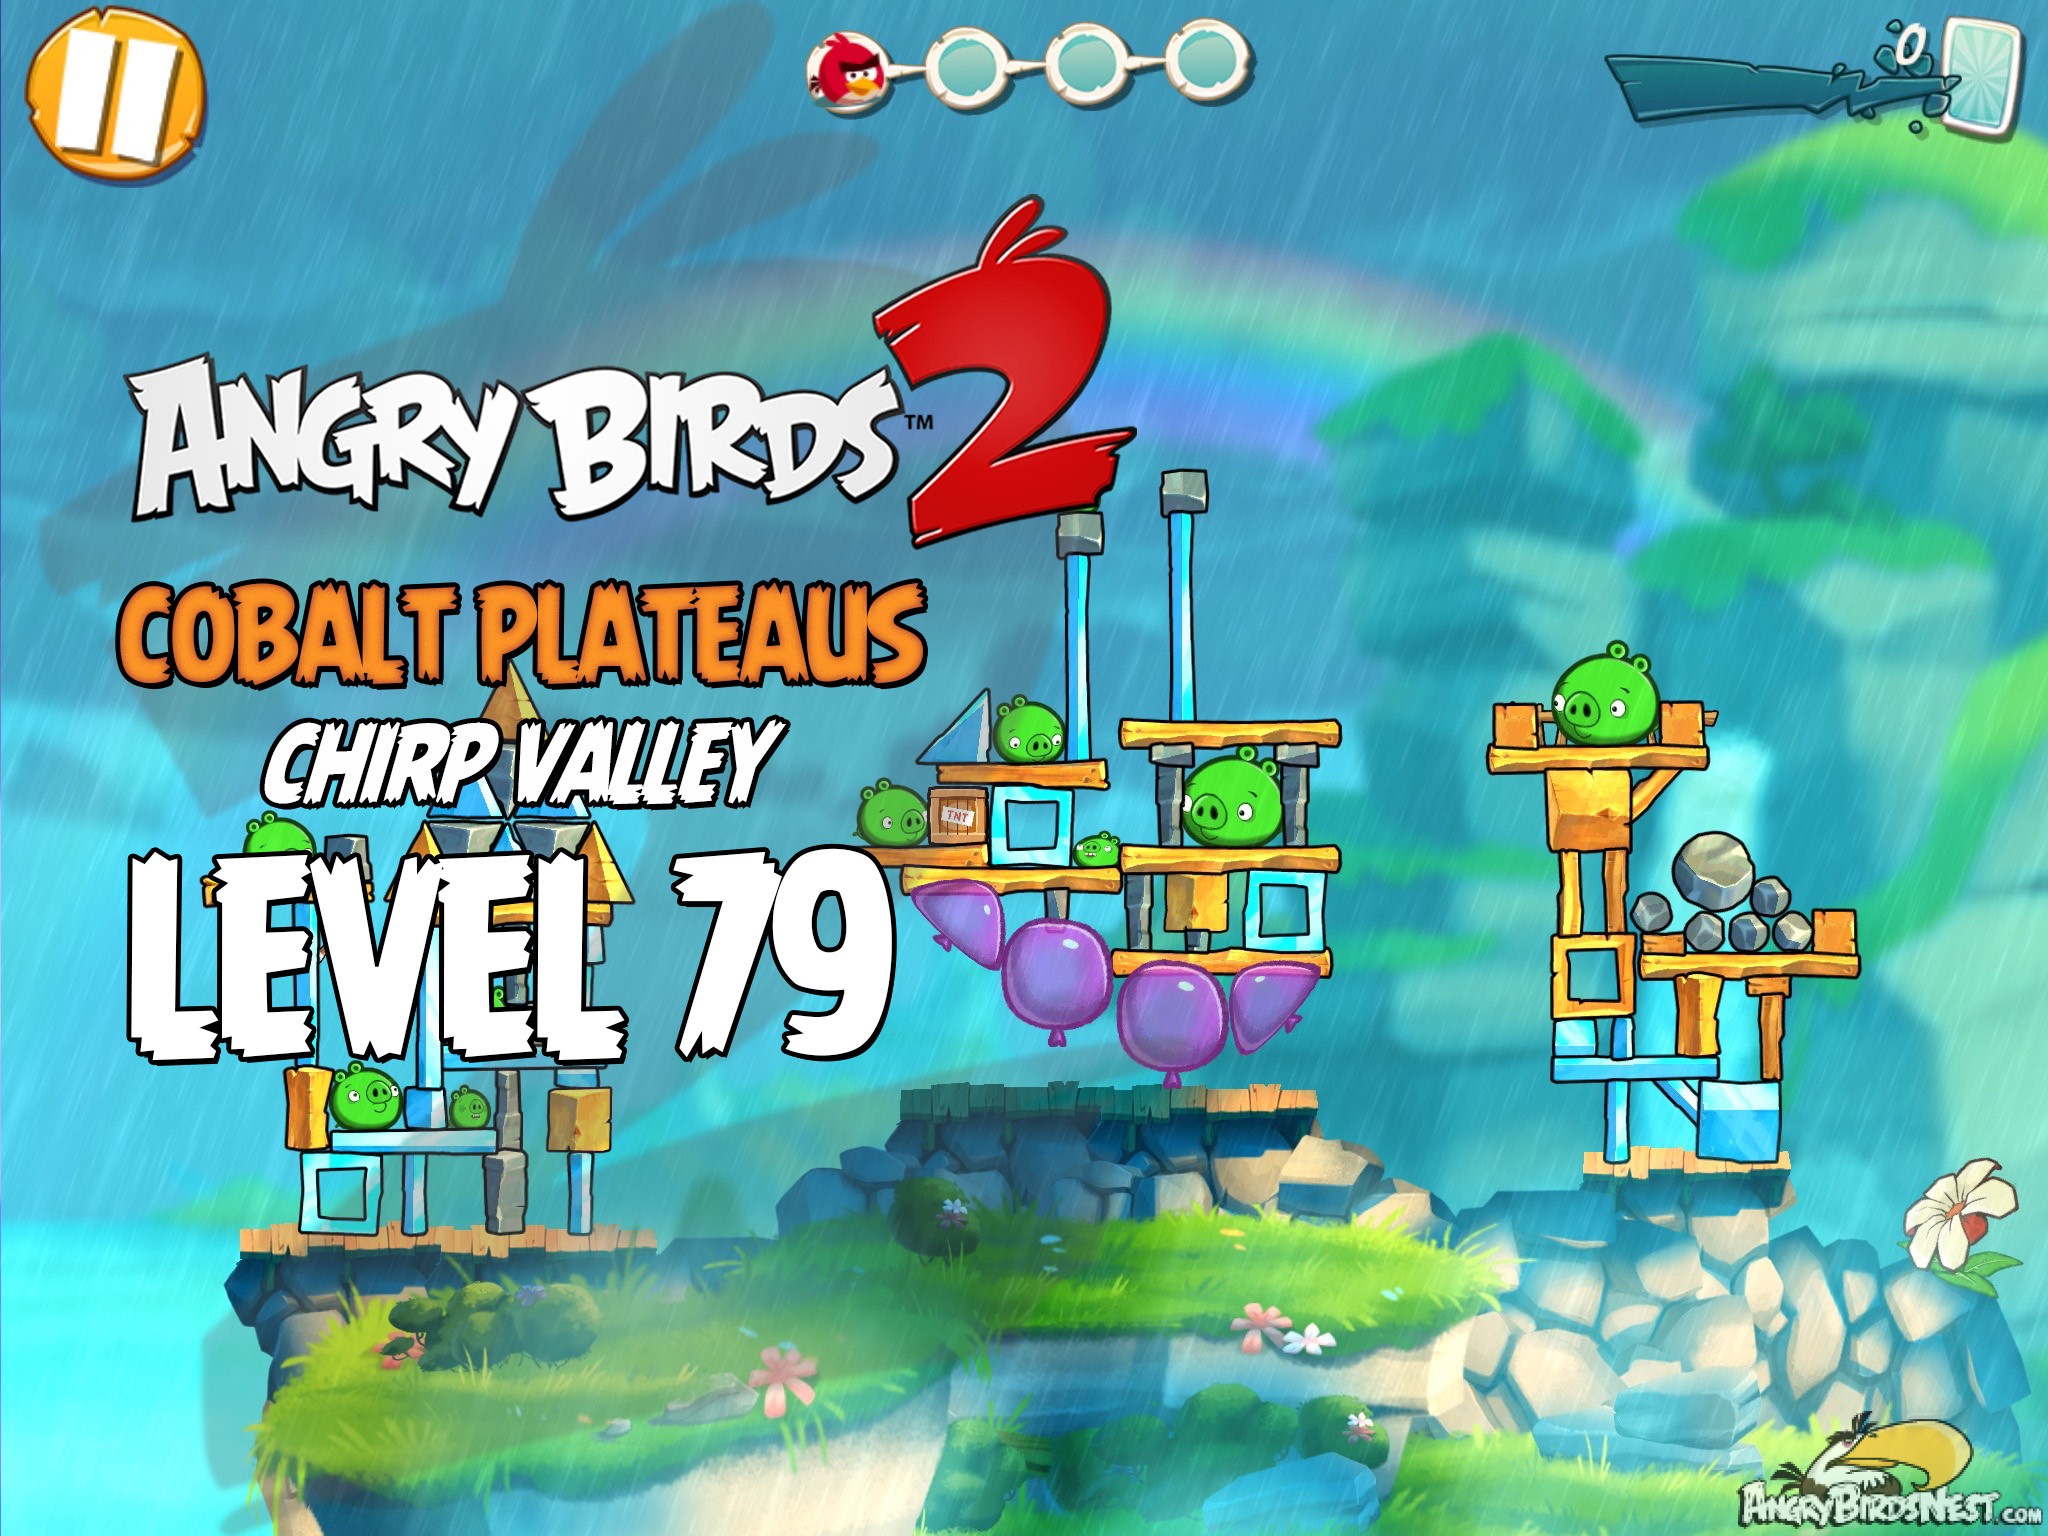 Angry Birds 2 Cobalt Plateaus Chirp Valley Level 79